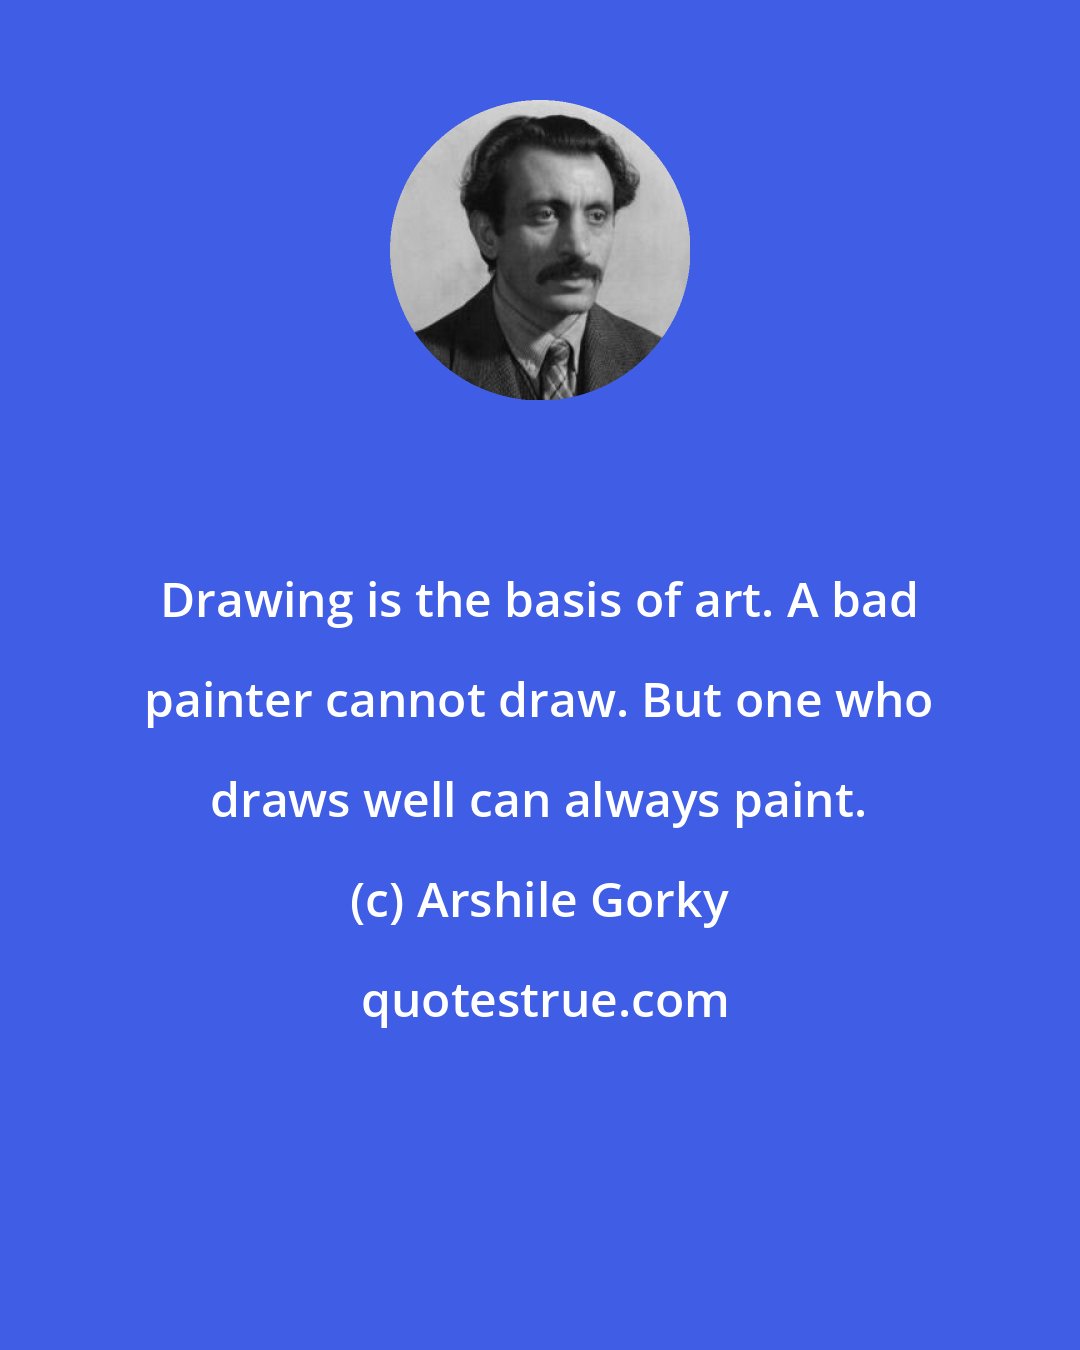 Arshile Gorky: Drawing is the basis of art. A bad painter cannot draw. But one who draws well can always paint.